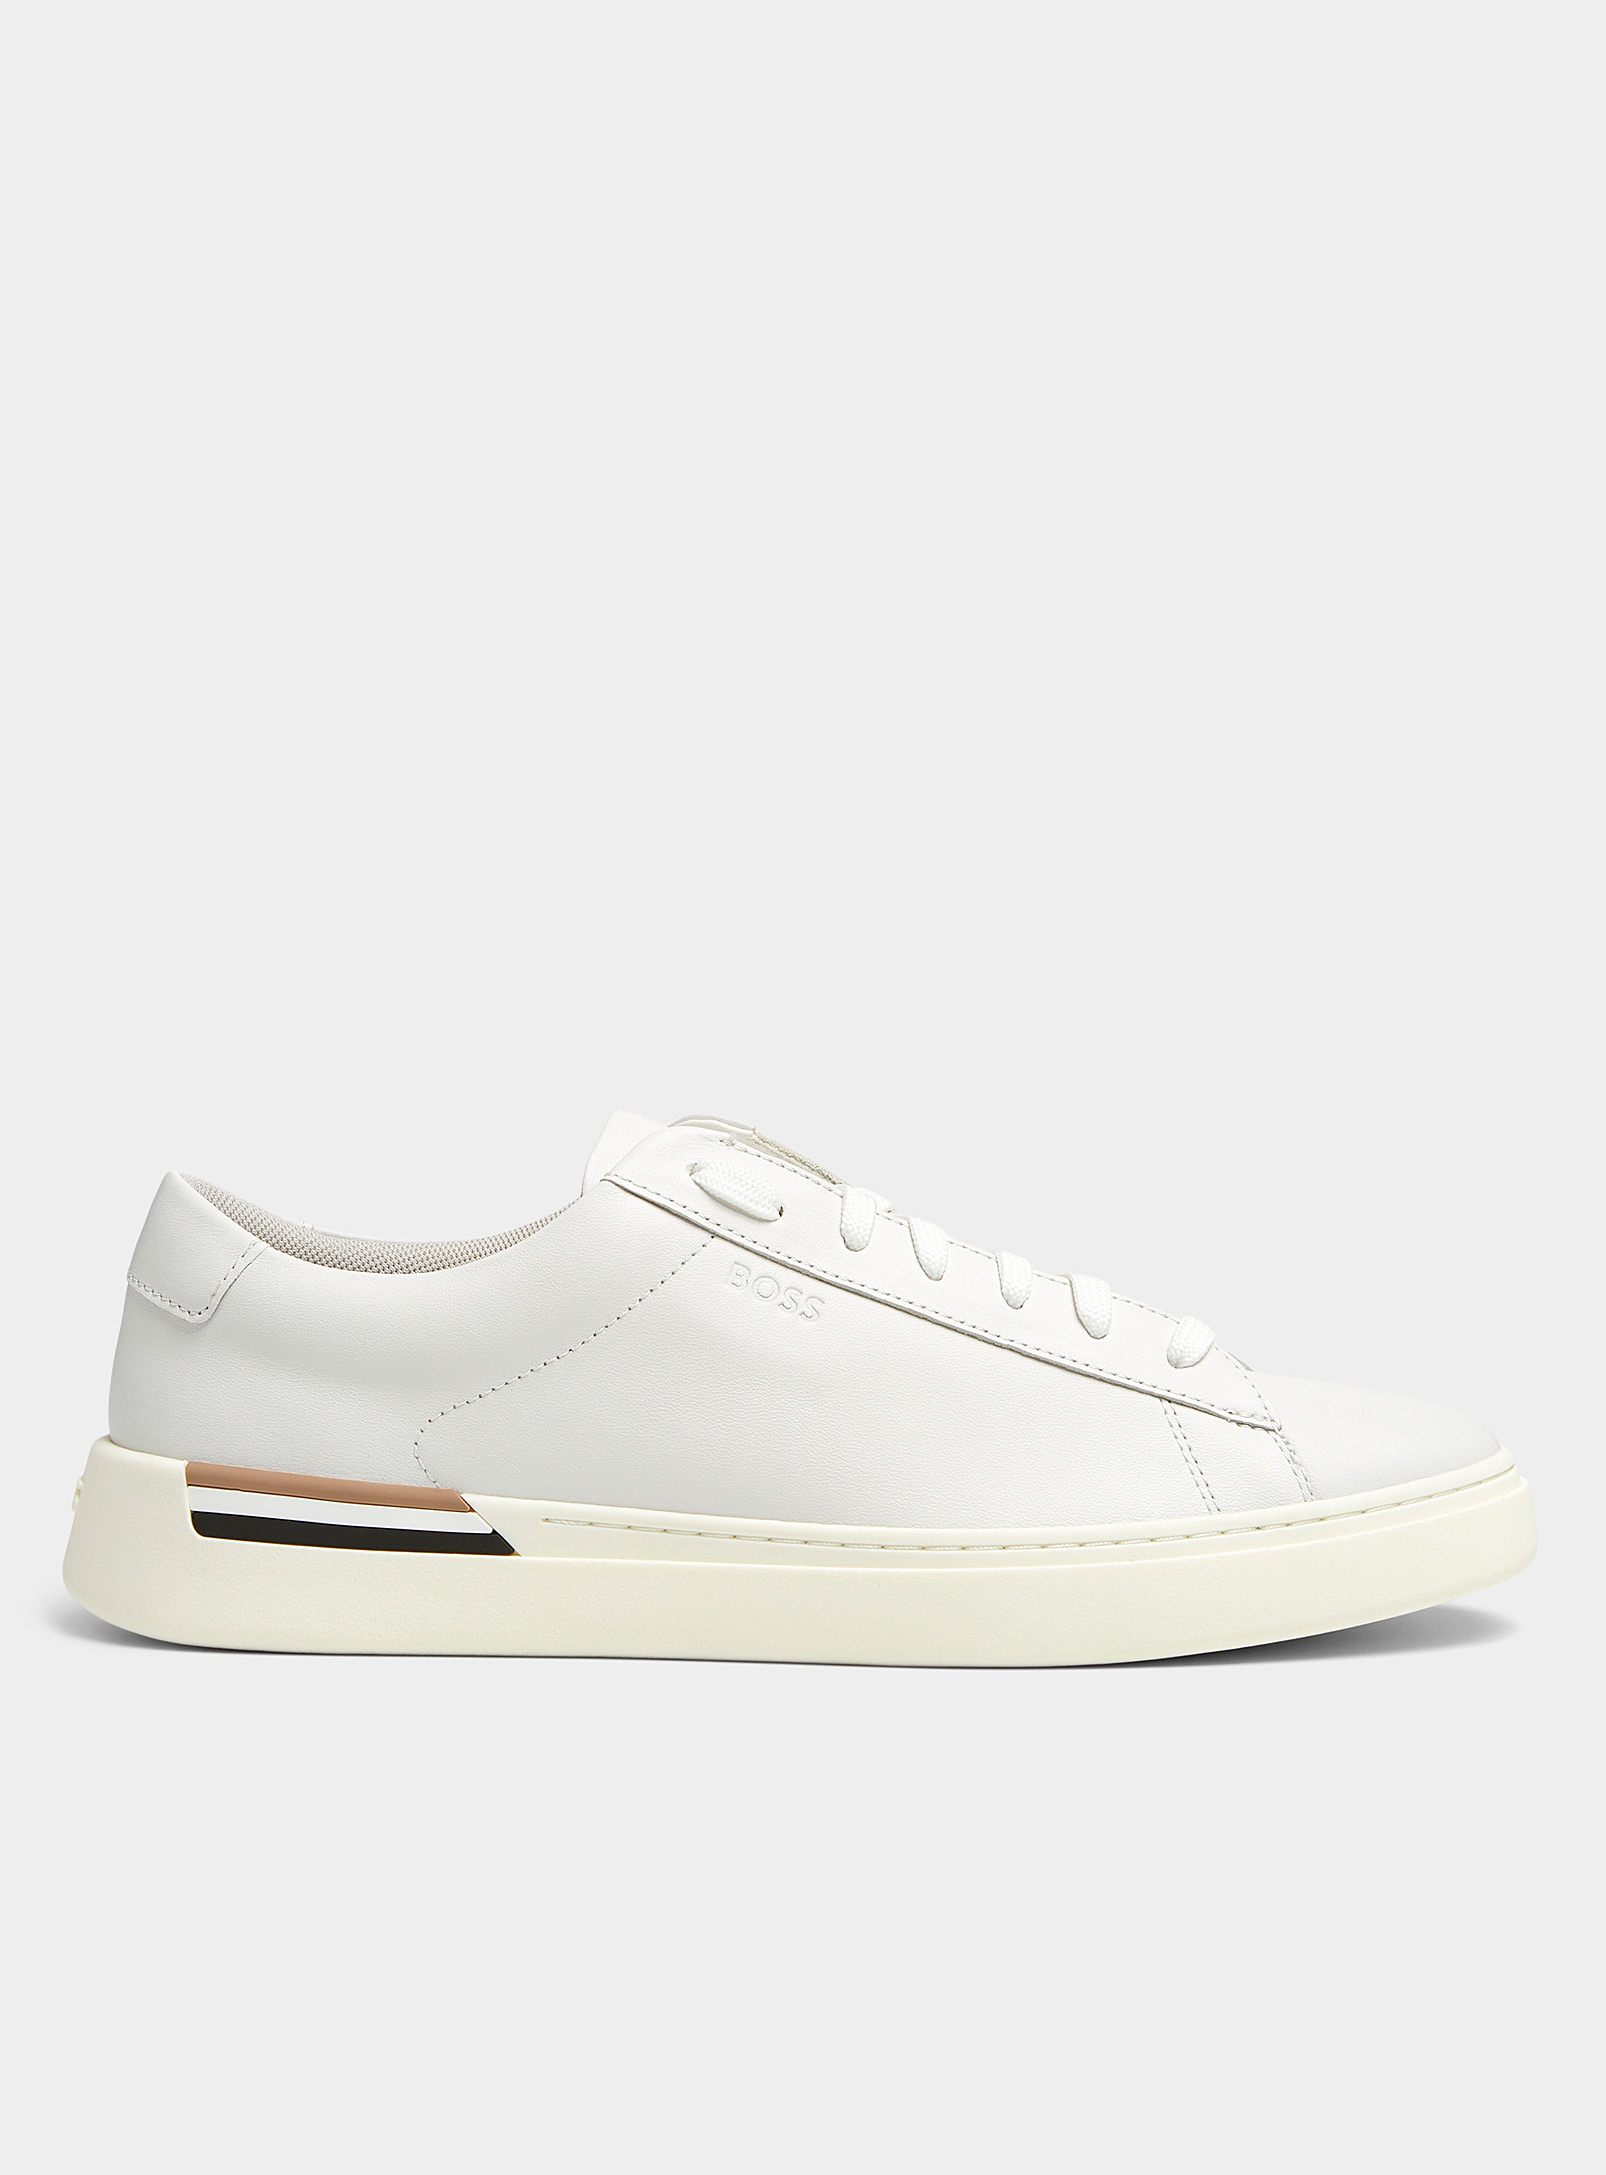 Hugo Boss Clint Mens Leather Cupsole Trainers With Logos And Signatu In White 100